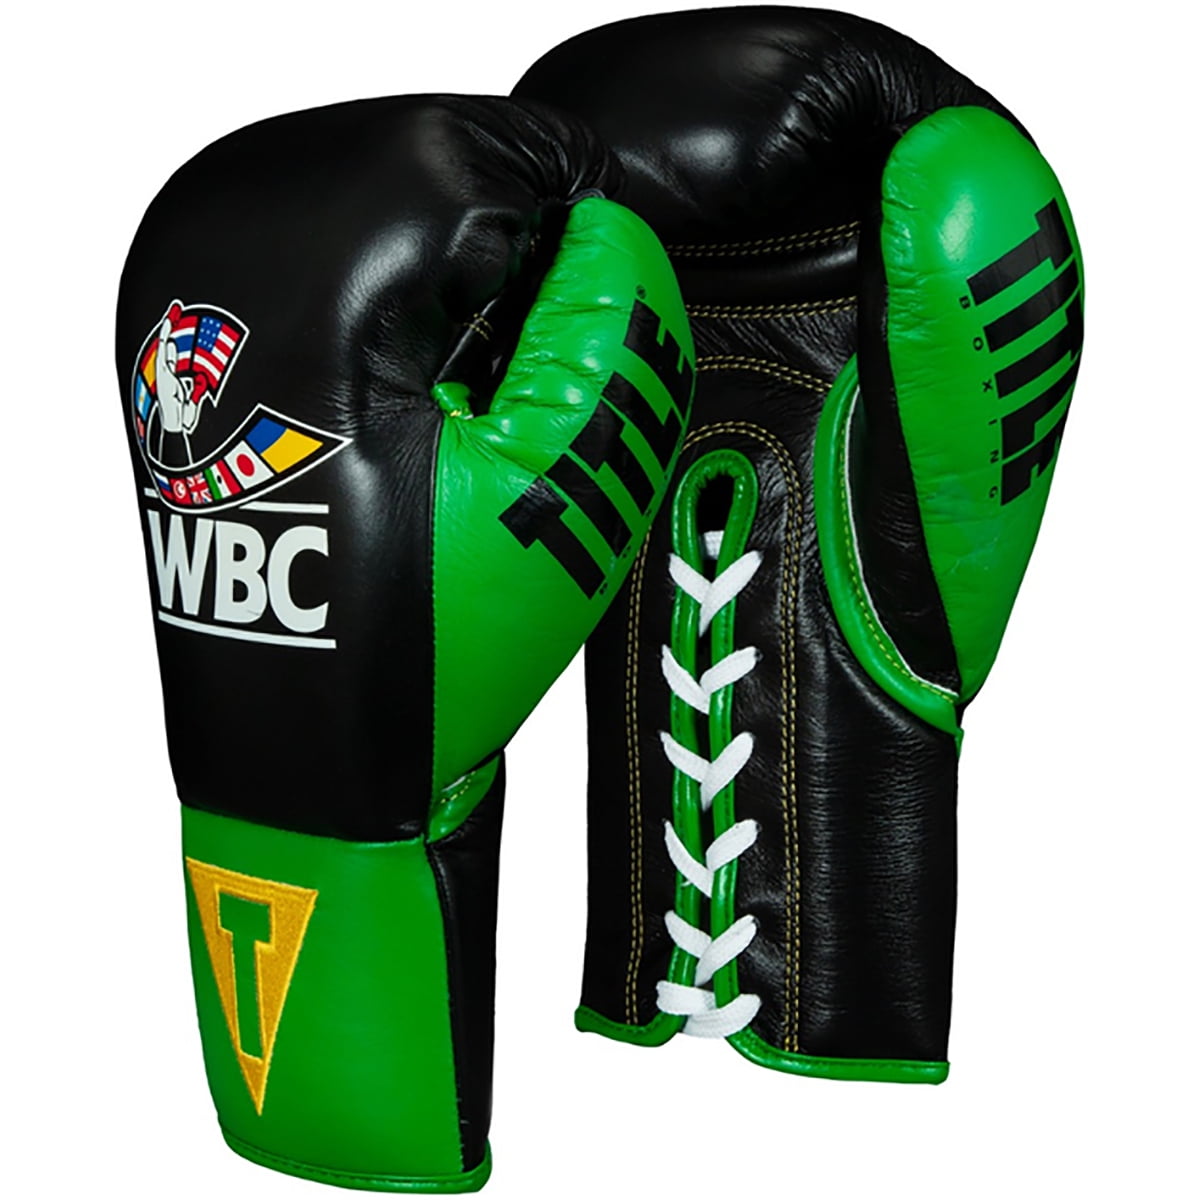 Boxing Gloves 8oz to 16oz Artificial Leather 3 layers Training Green & White 